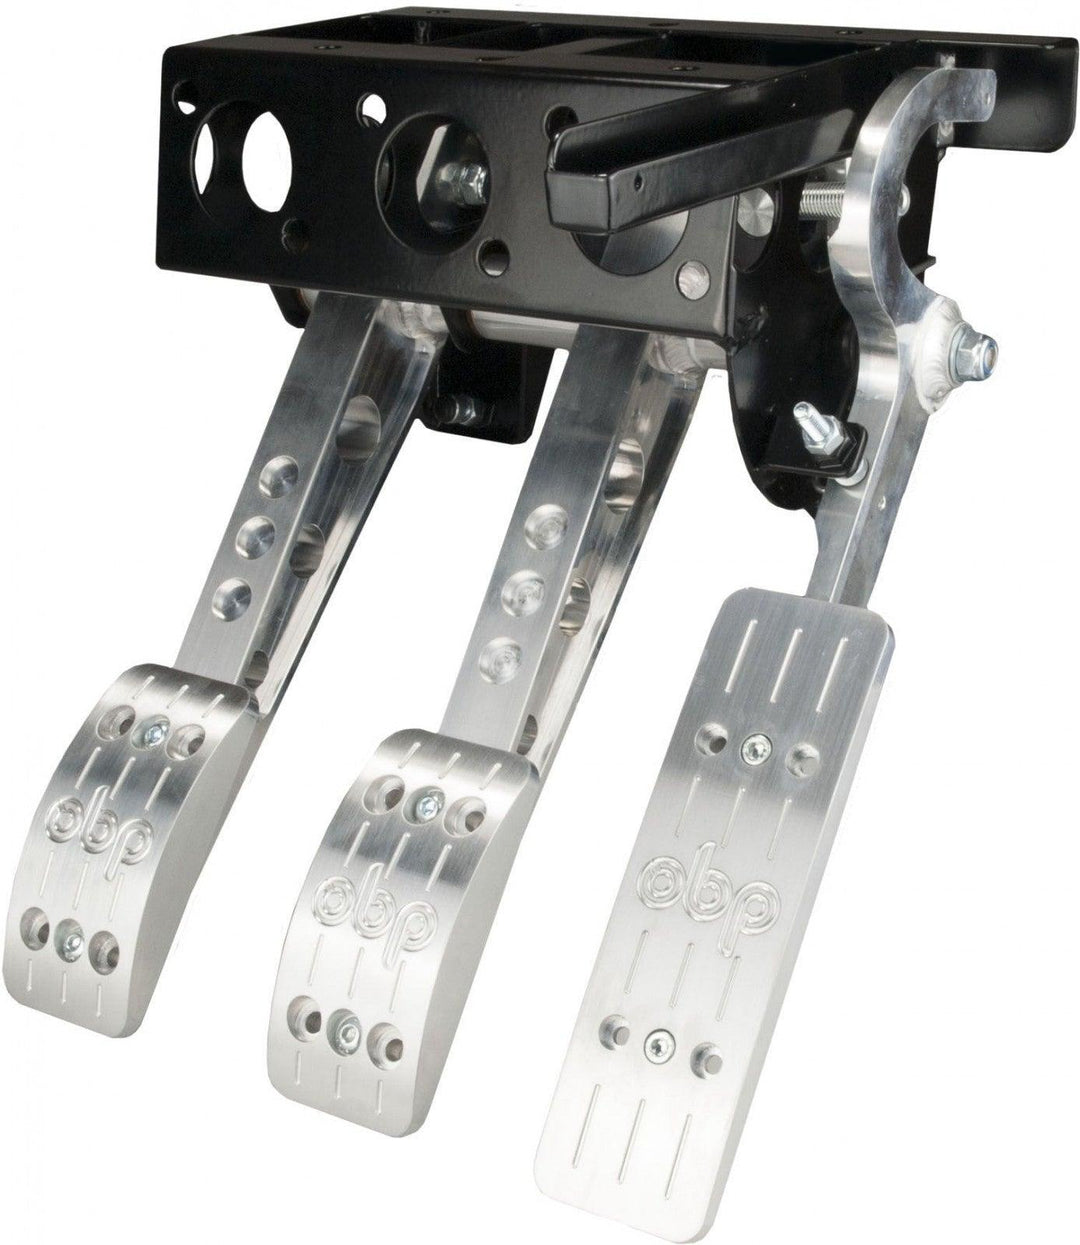 obp Motorsport Pro-Race V2 3 Pedal System - Top Mounted Cockpit Fit - Attacking the Clock Racing